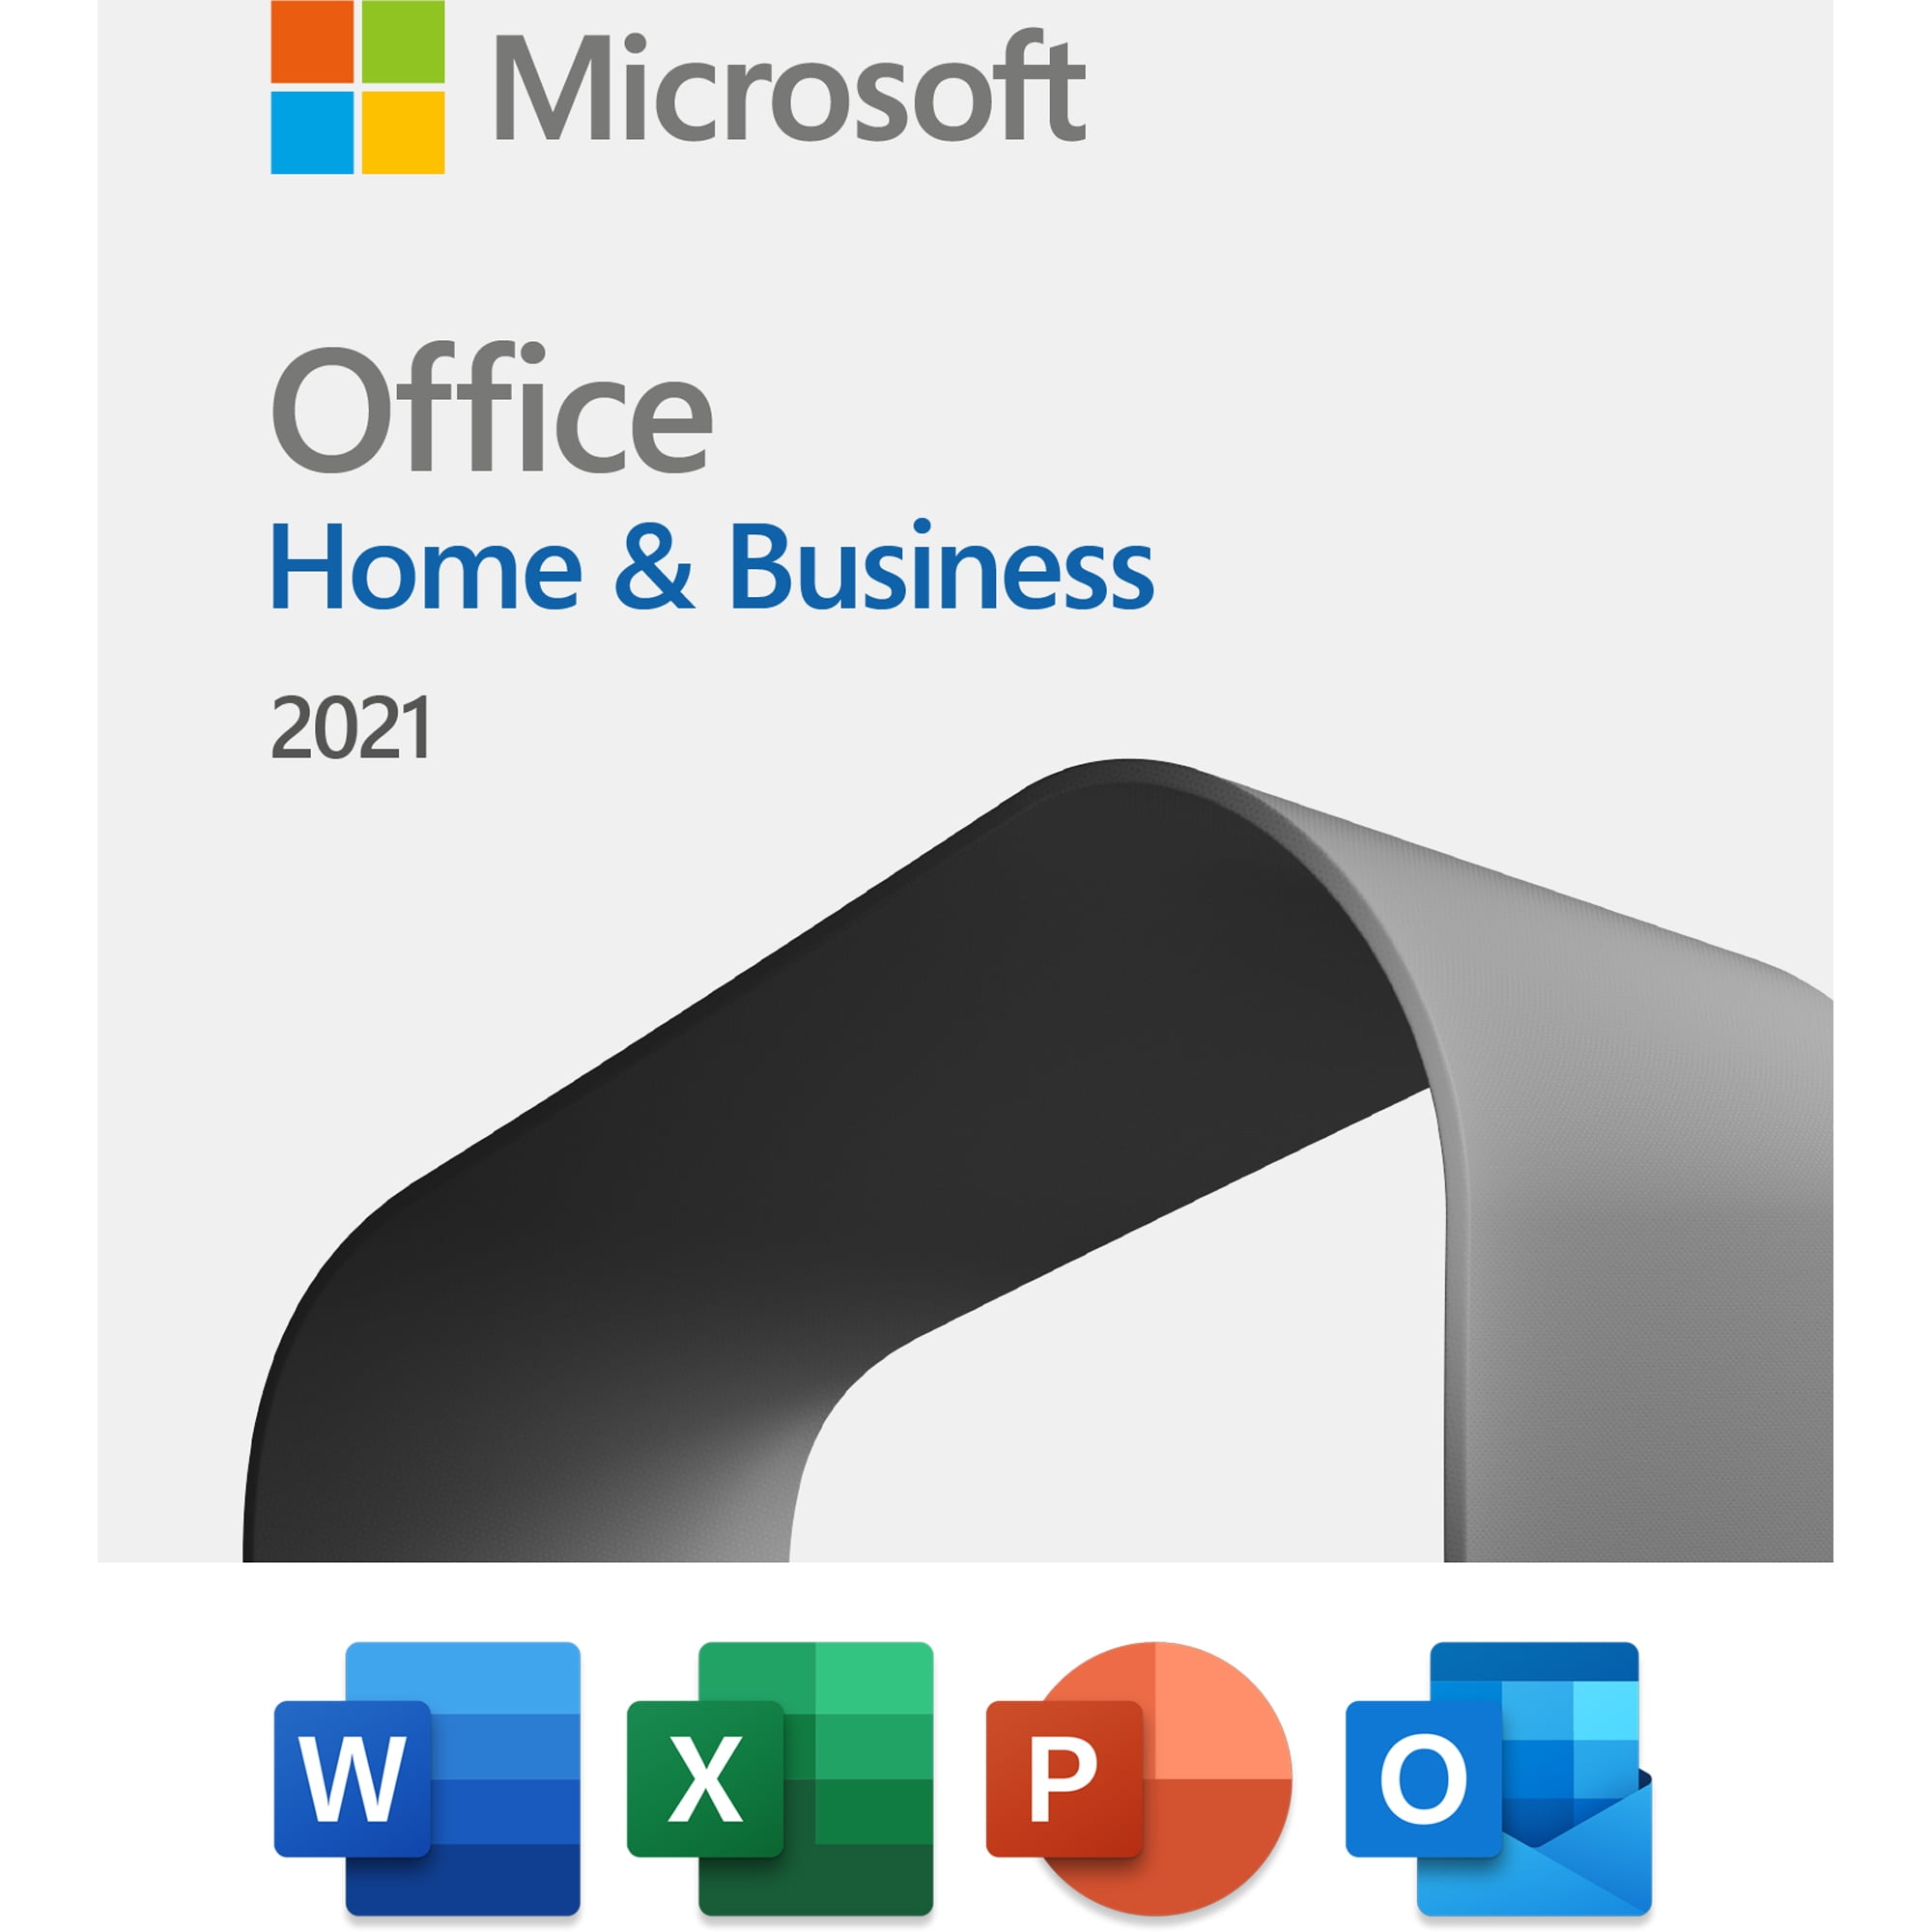 cheapest place to buy microsoft office